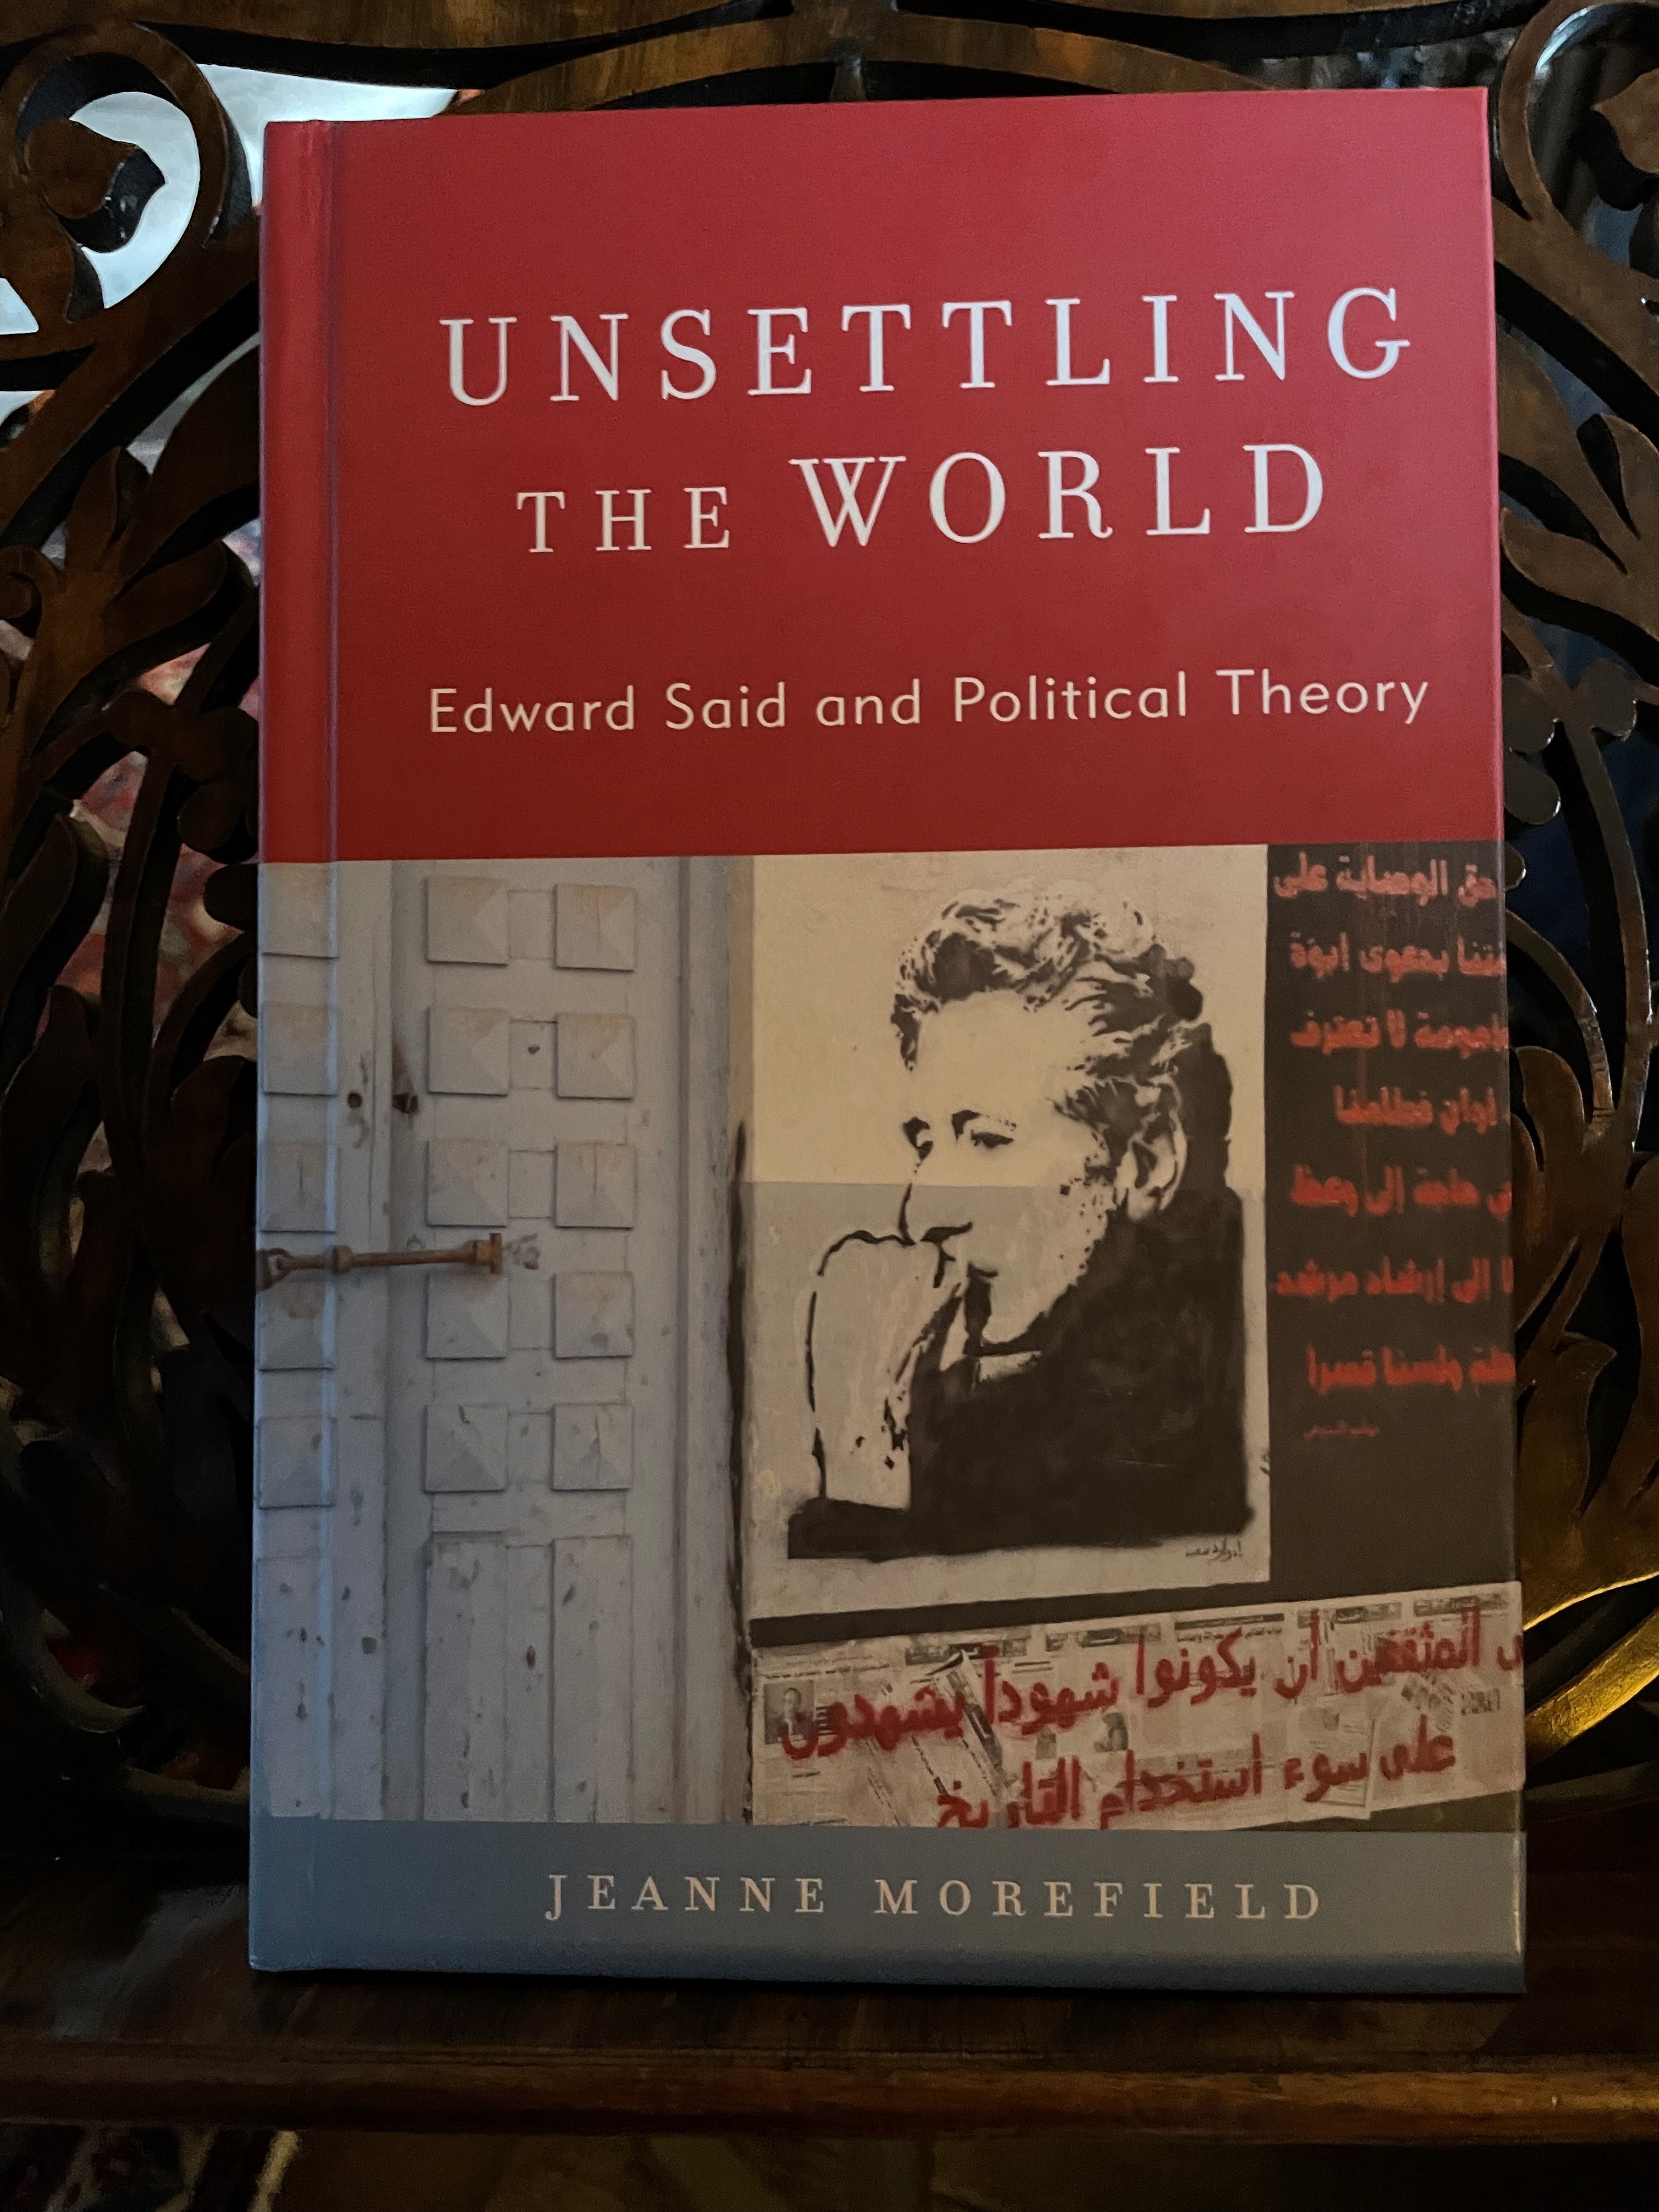 Book cover - 'Unsettling the World: Edward Said and Political Theory'